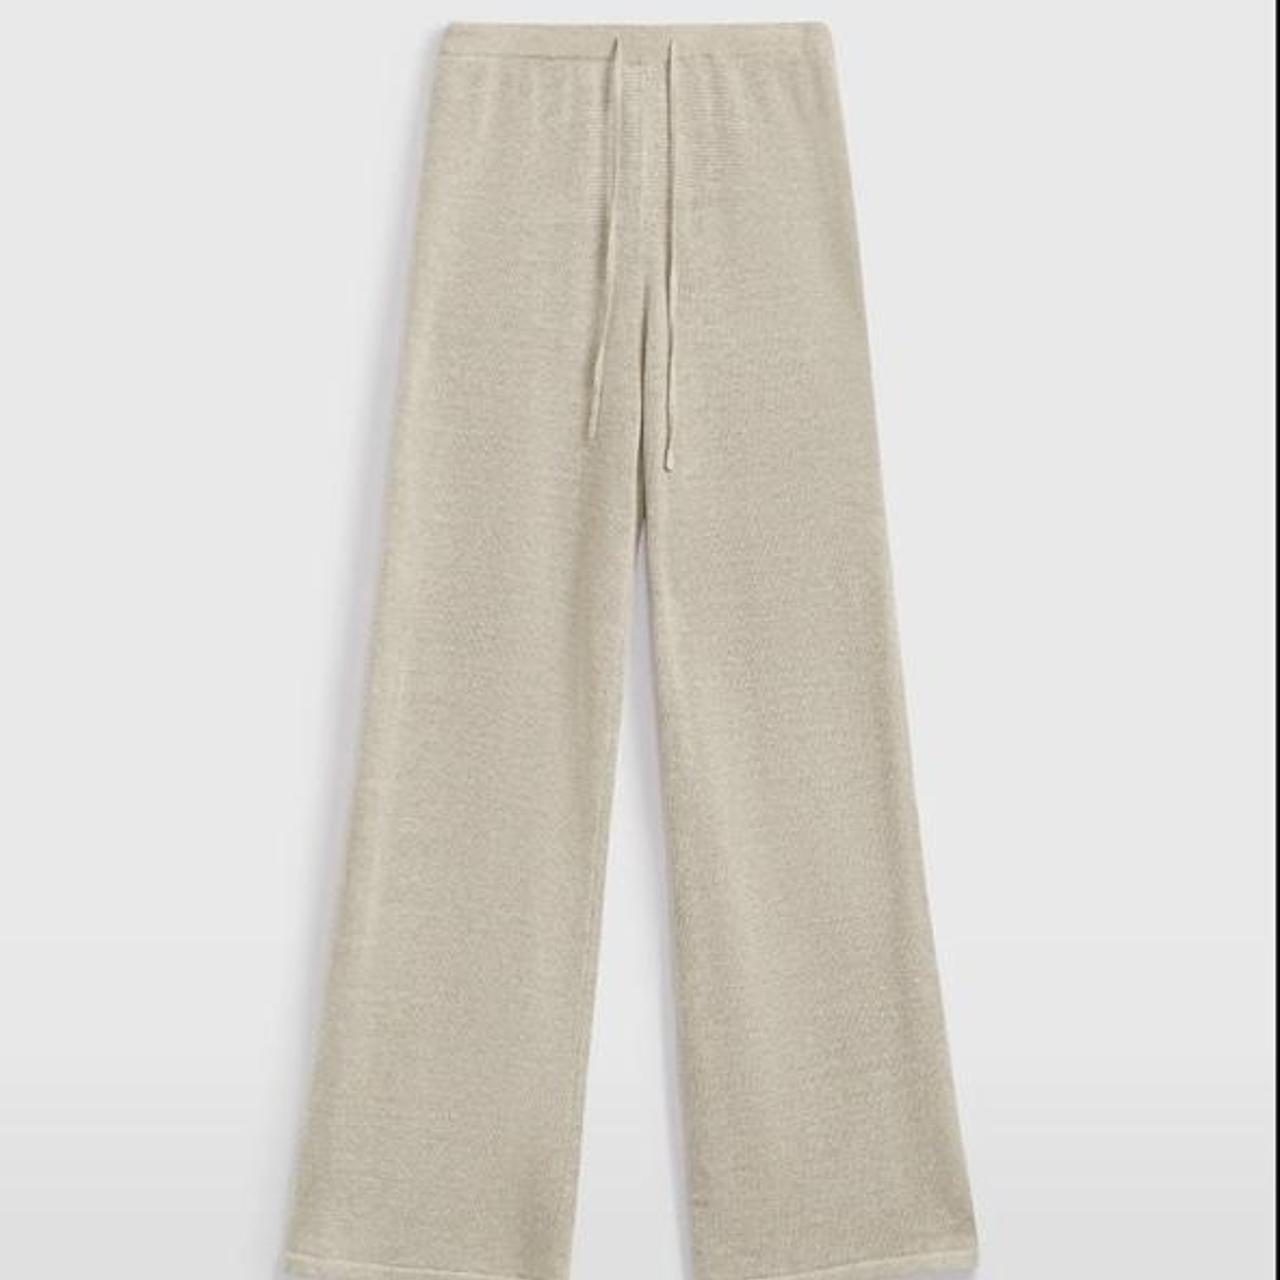 venroy knitted linen pants- taupe feel free to send... - Depop